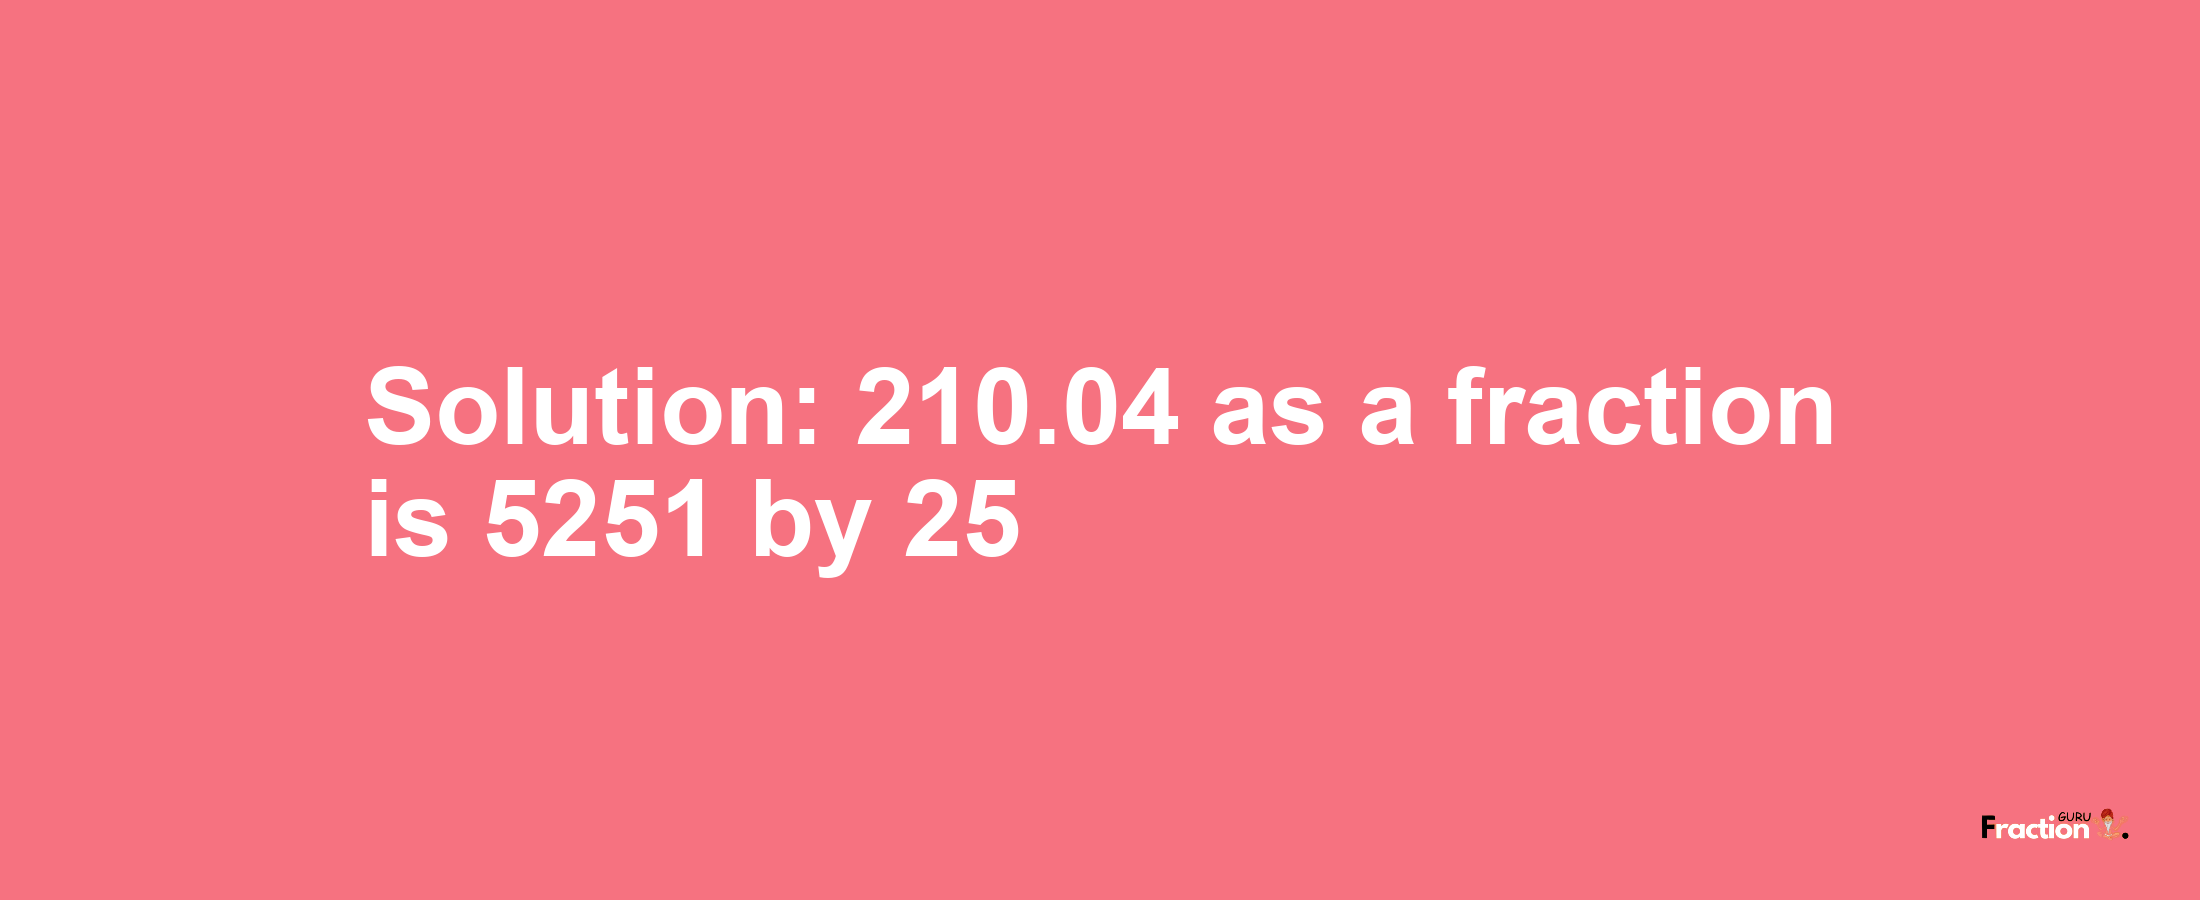 Solution:210.04 as a fraction is 5251/25